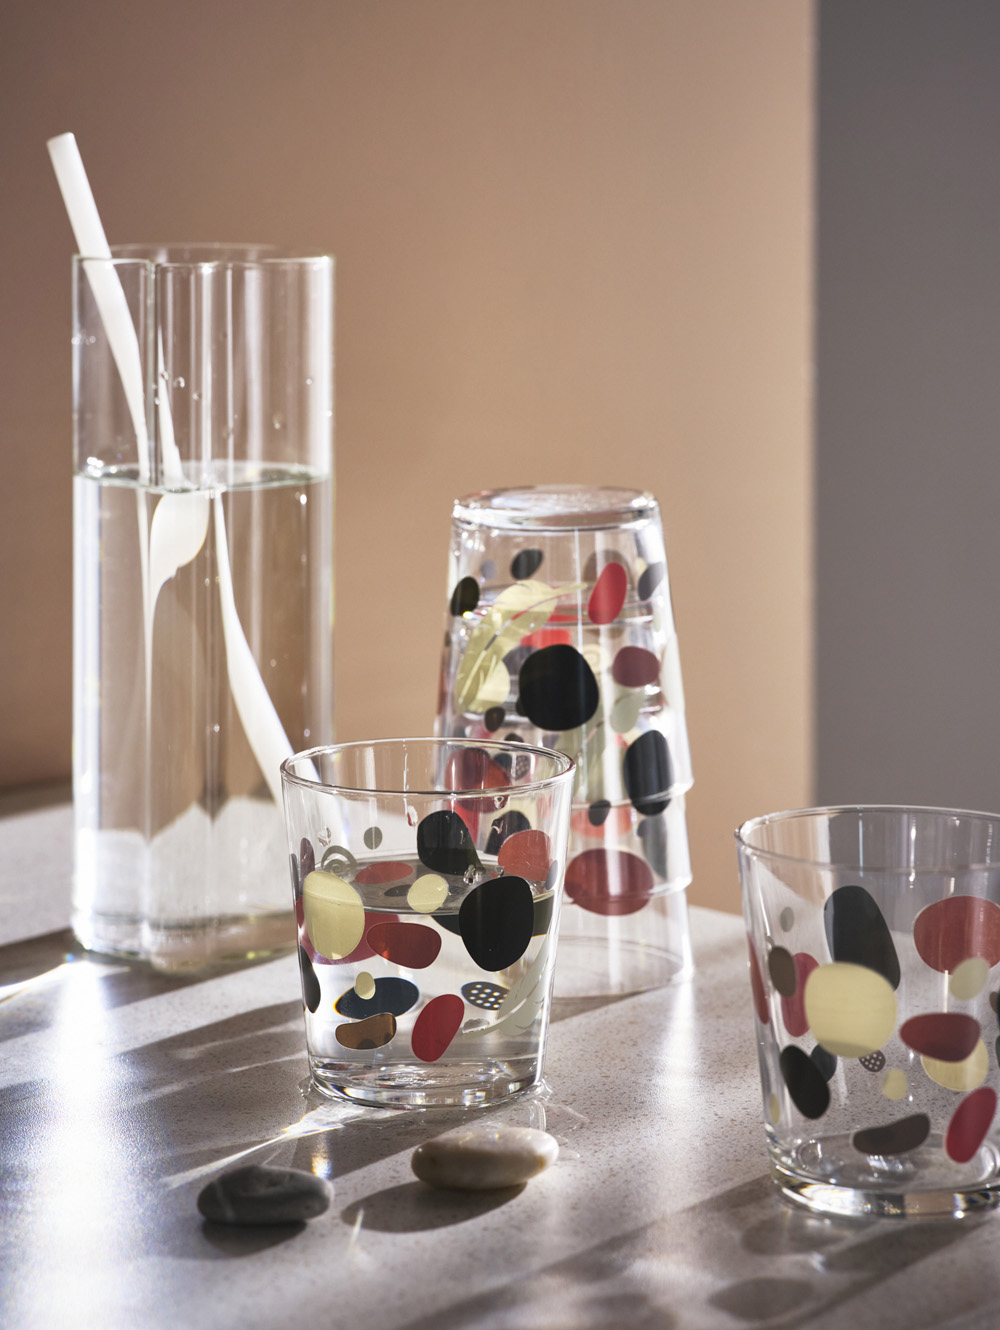 SOMMARFLOX glasses with stone pattern for IKEA